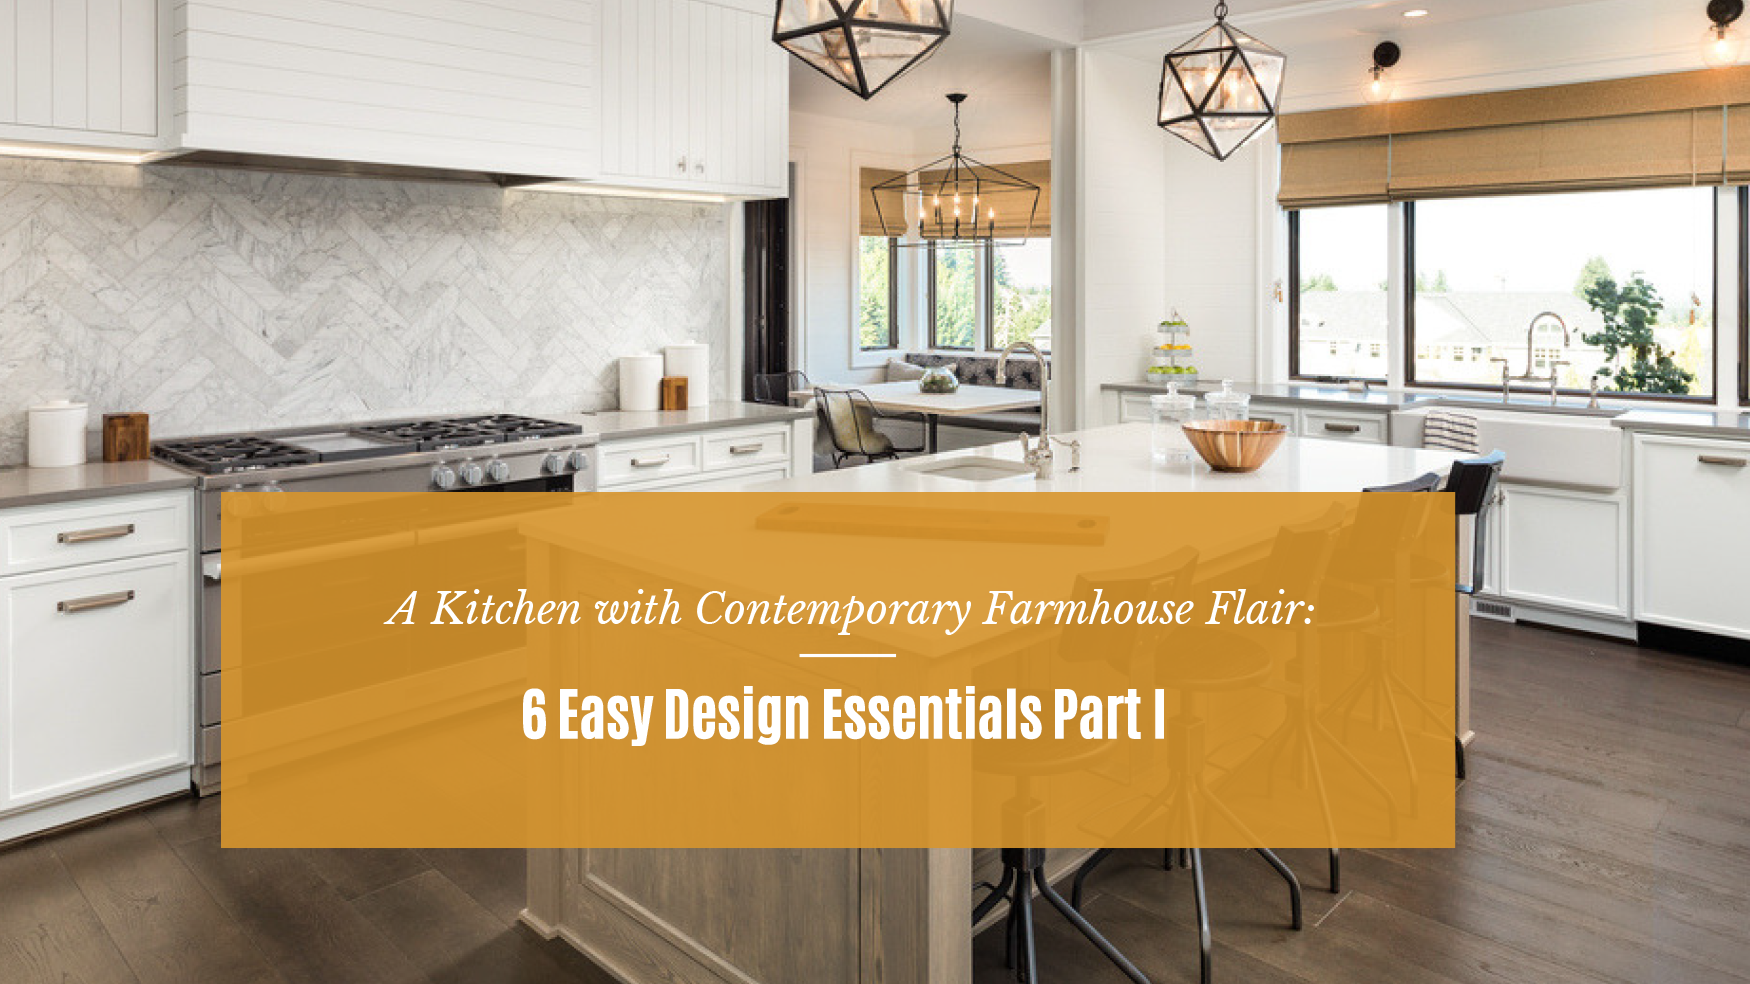 A Kitchen with Contemporary Farmhouse Flair: 6 Easy Design Essentials Part I